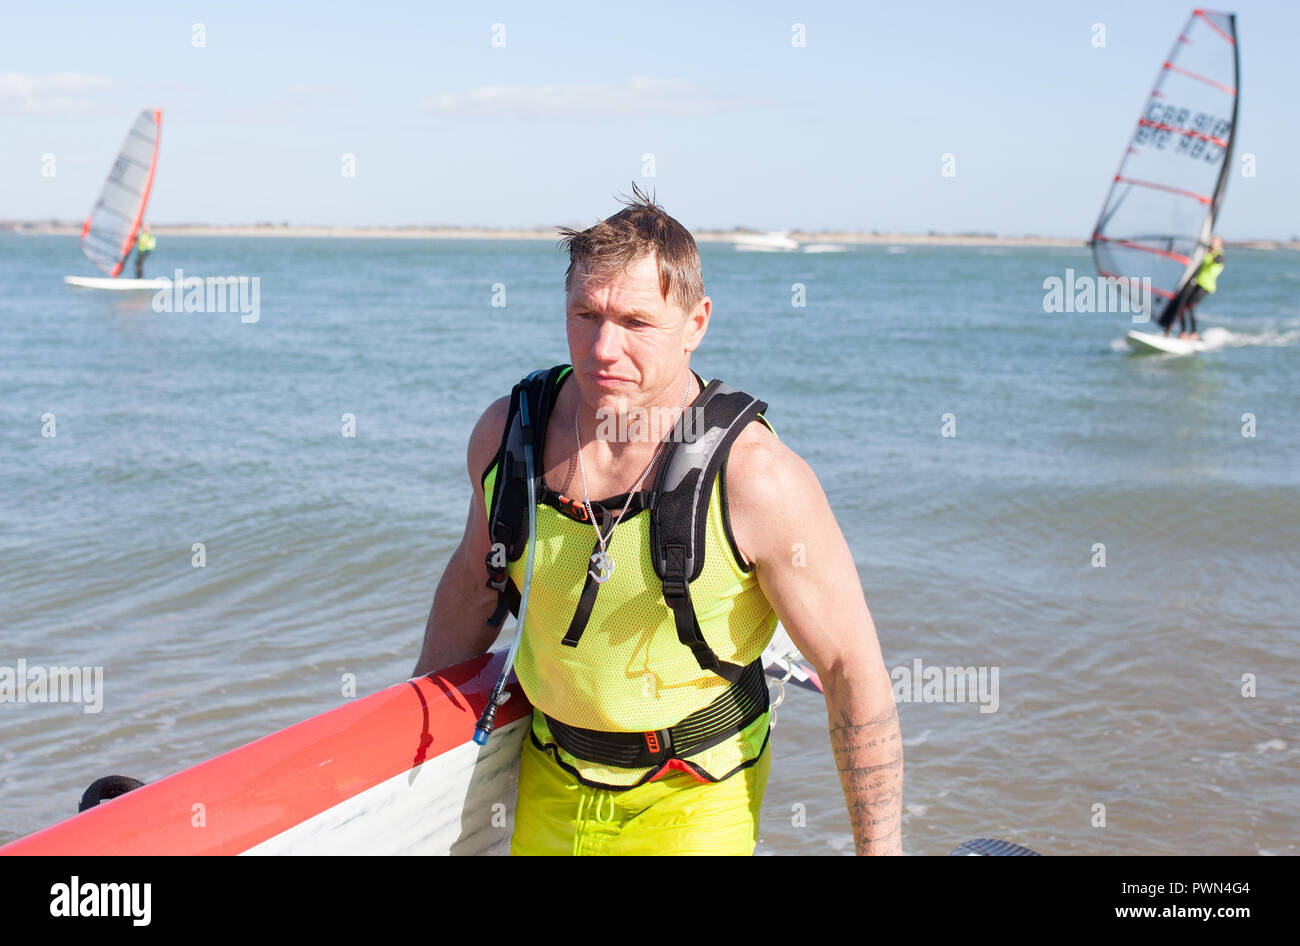 Man carrying paddle board to finish line Stock Photo